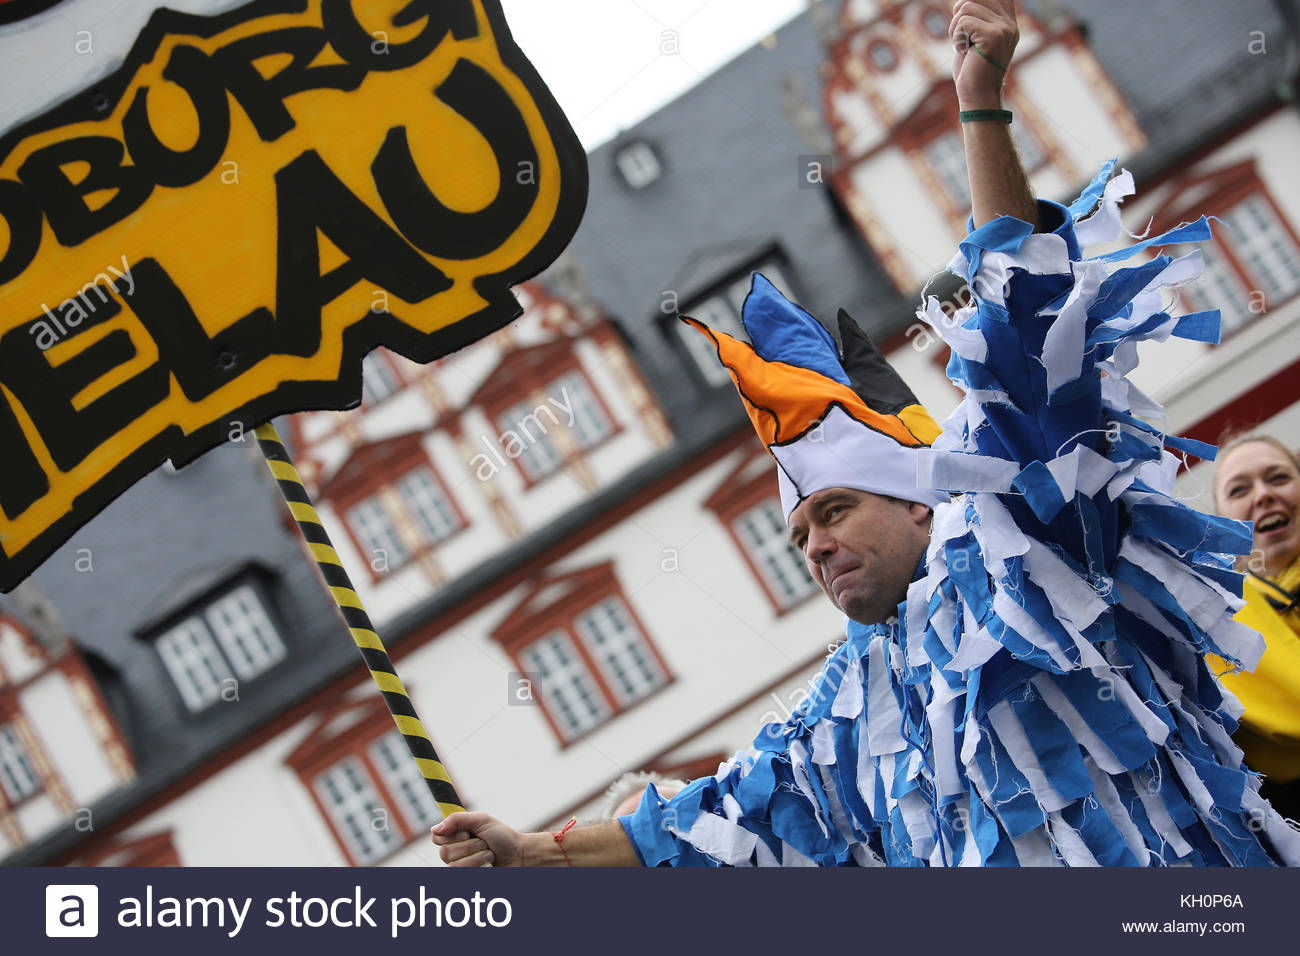 Coburg, Germany. 11th Nov, 2017. The jester at the ceremony to officially open Carnival season plays to the crowd in Coburg, Germany.The eleventh hour of the eleventh day of the eleventh month is the official opening time of Carnival in Germany, an age old custom that reaches its climax in February. Credit: reallifephotos/Alamy Live News Stock Photo